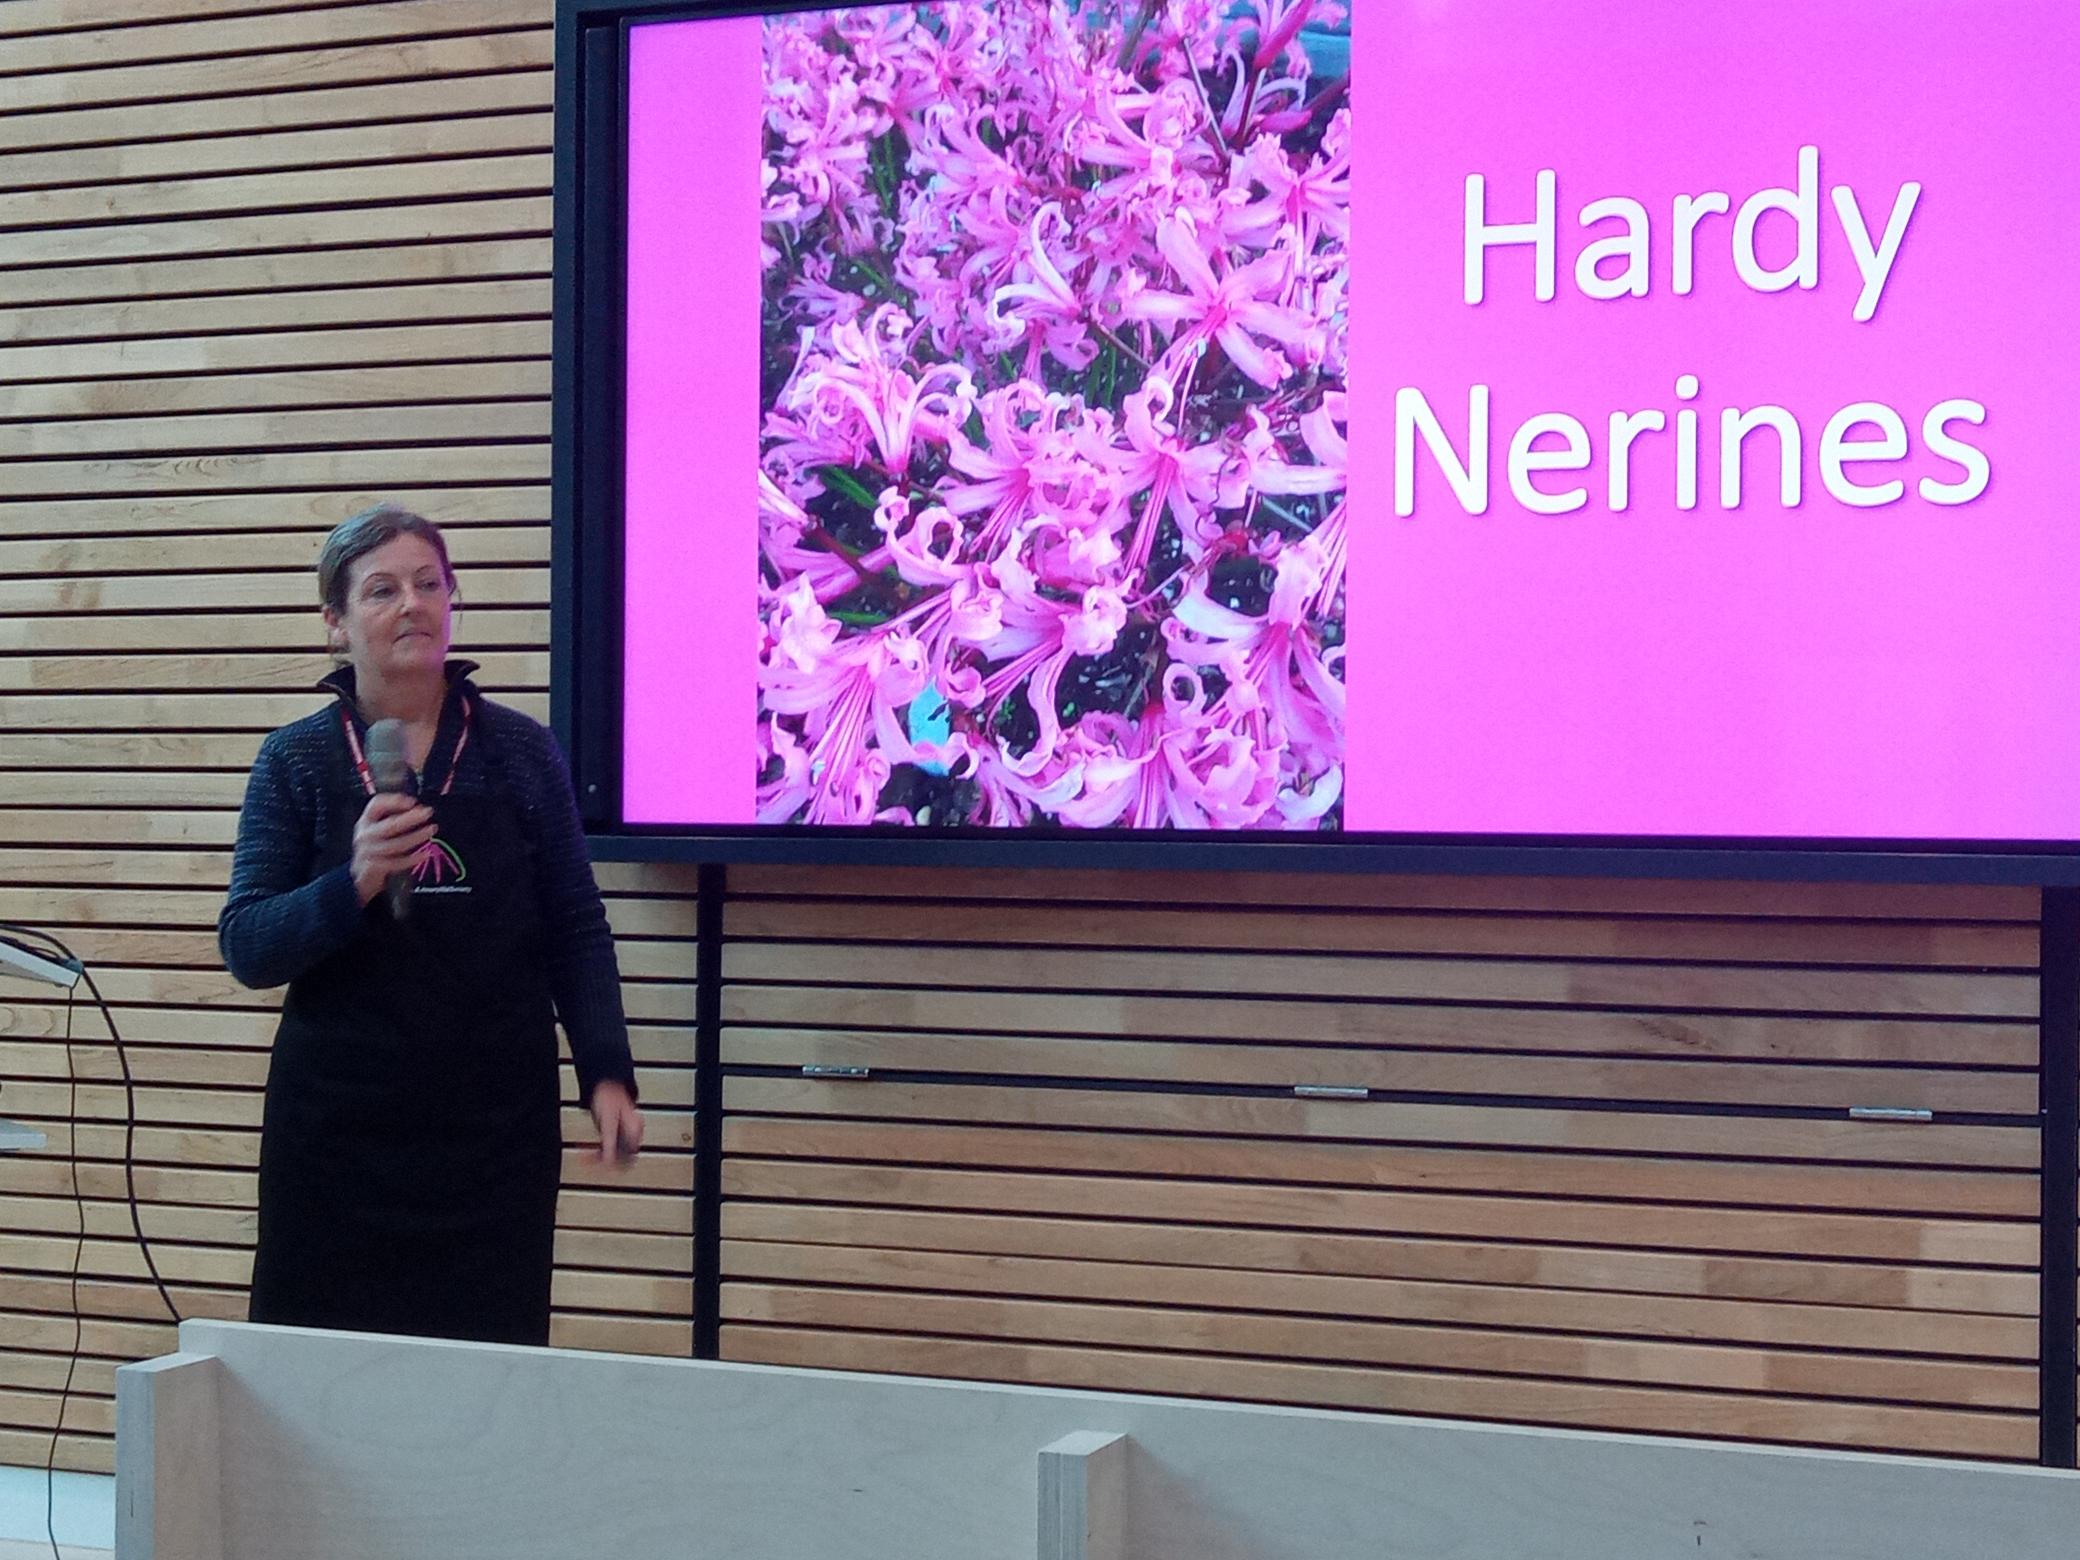 ....and Caroline giving hers on Hardy Nerines.